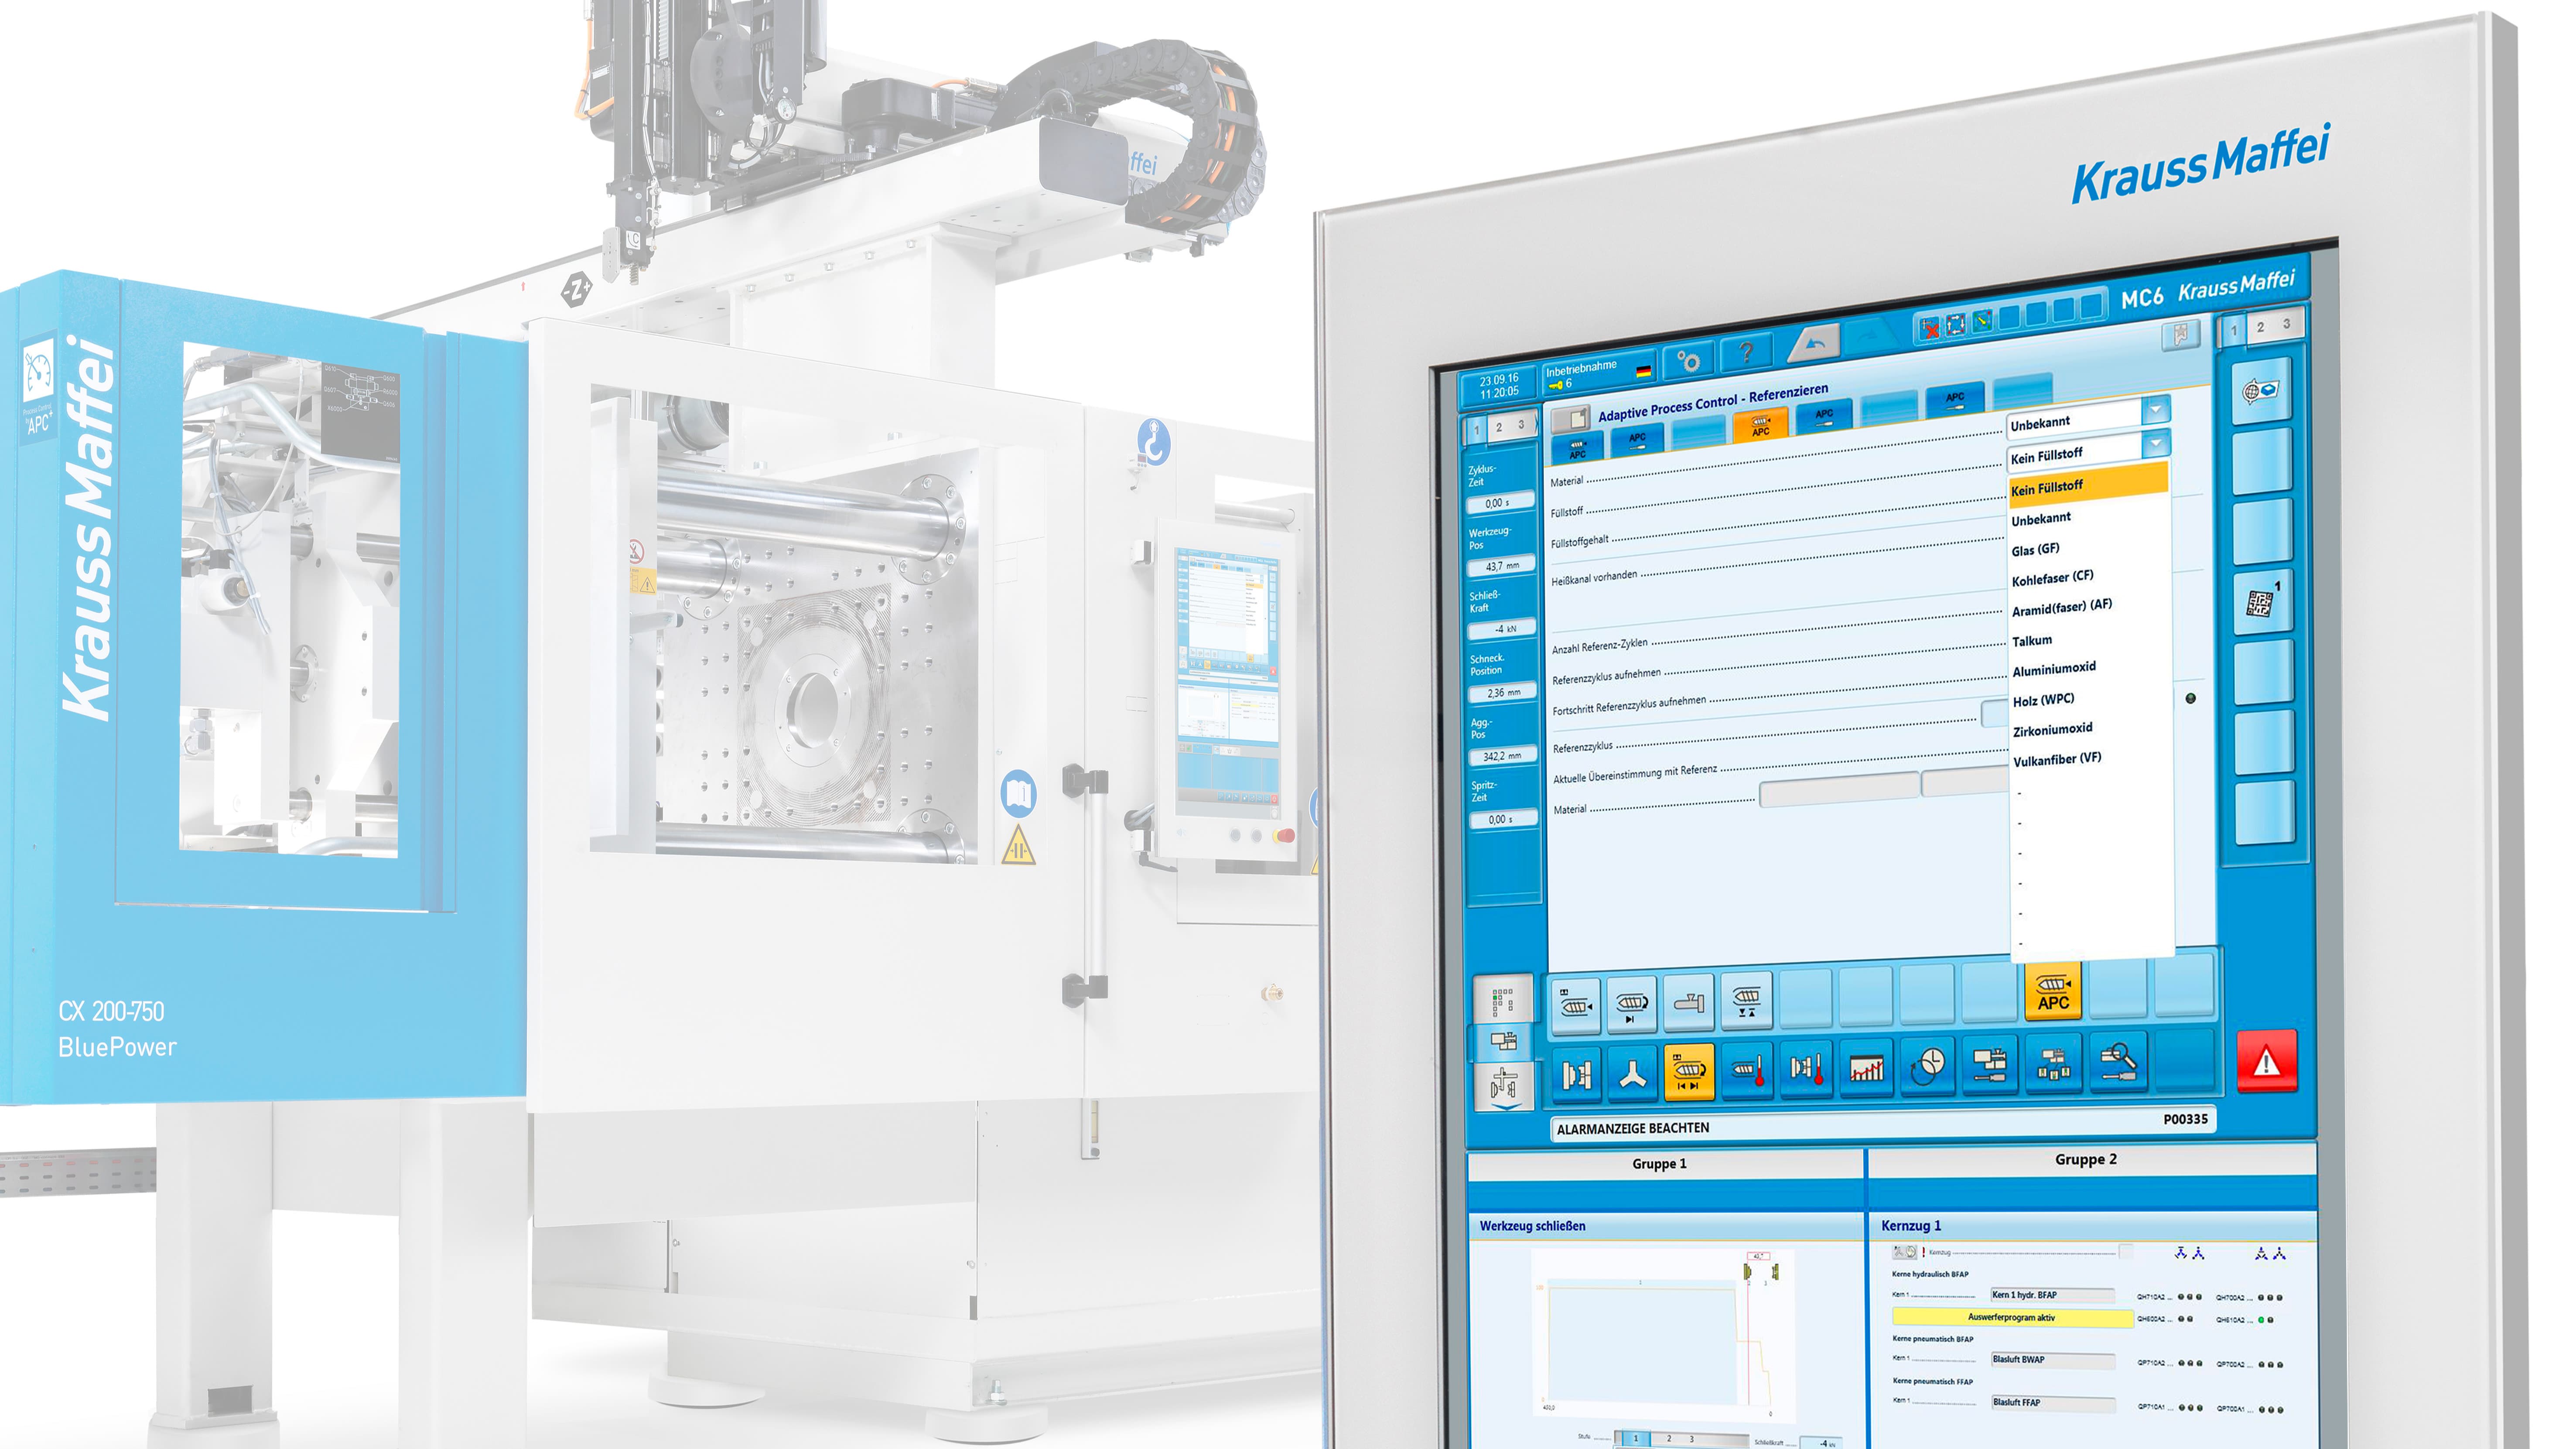 APC plus features many intelligent features that make injection molding significantely more stable.